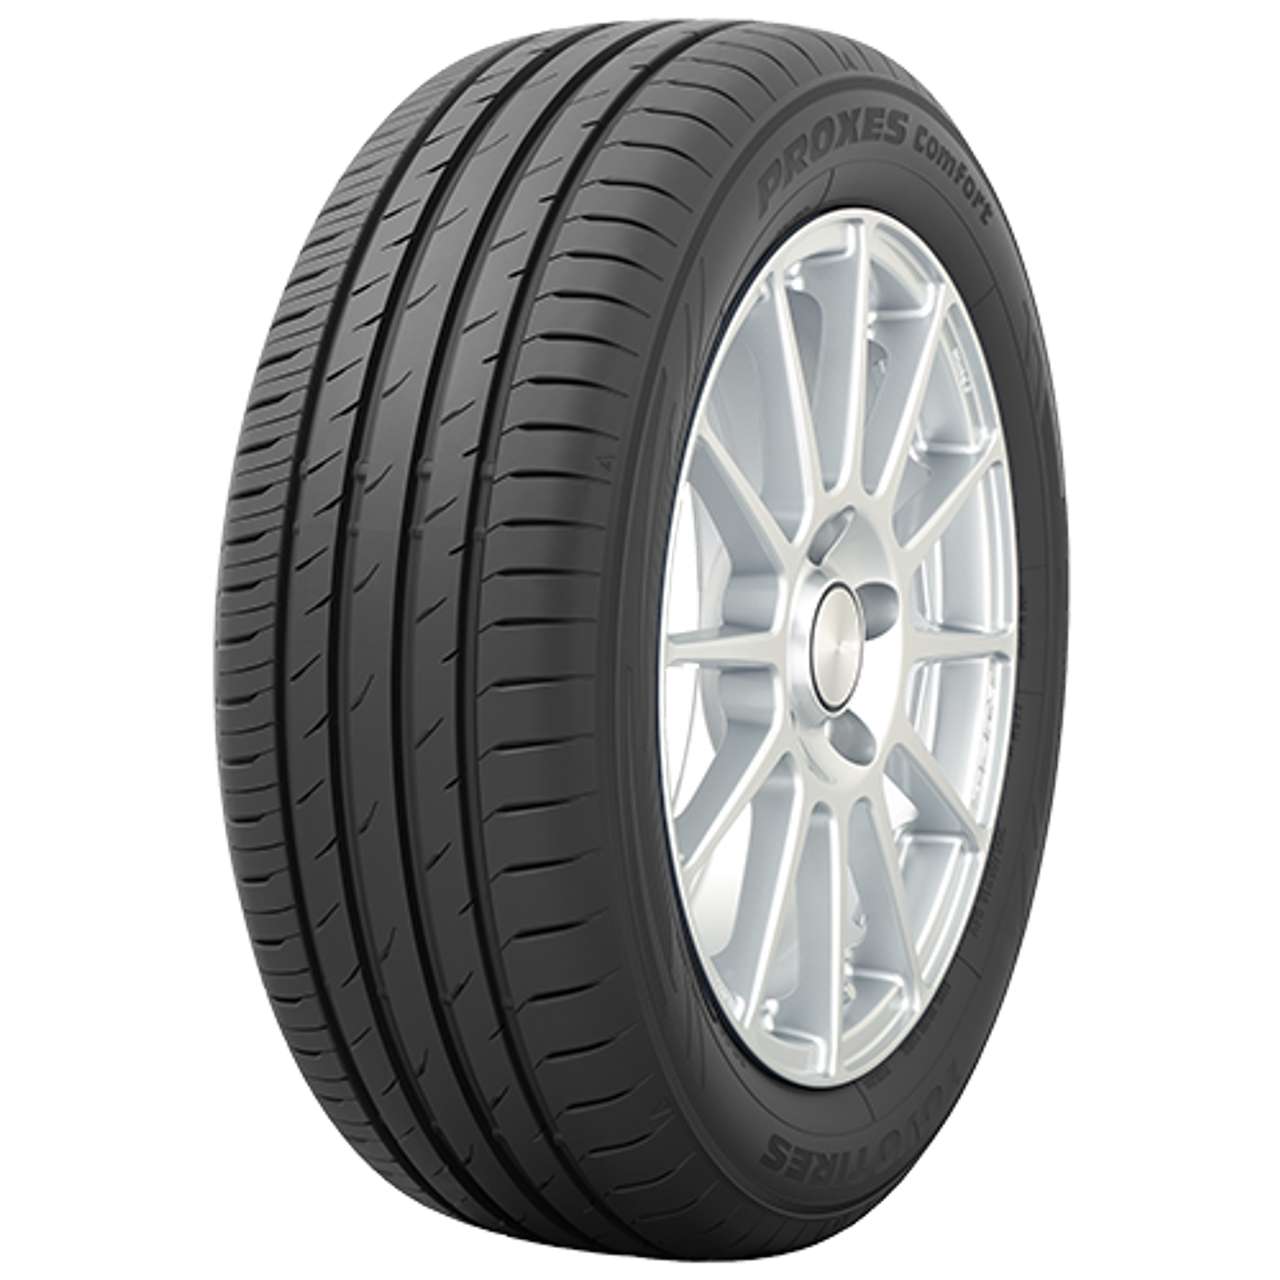 TOYO PROXES COMFORT 225/45R17 94V BSW XL